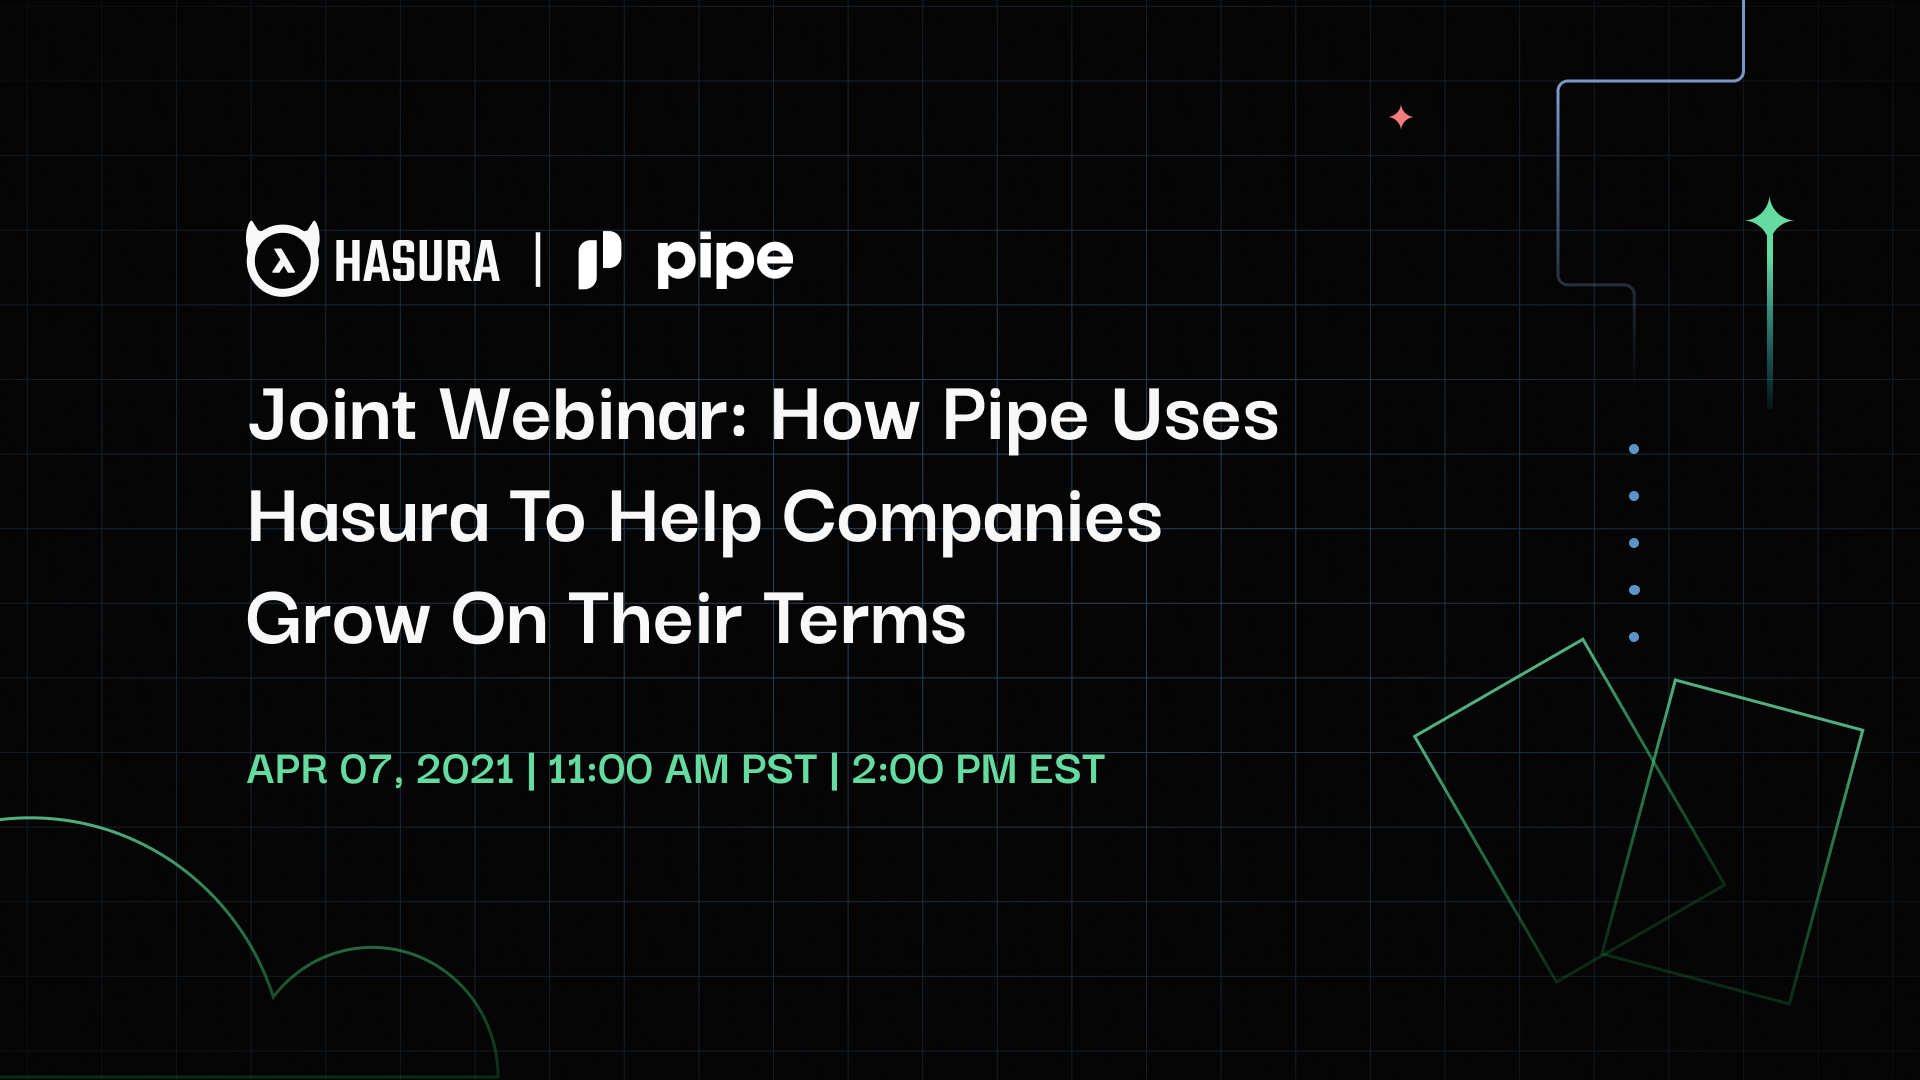 Joint Webinar: How Pipe Uses Hasura To Help Companies Grow On Their Terms